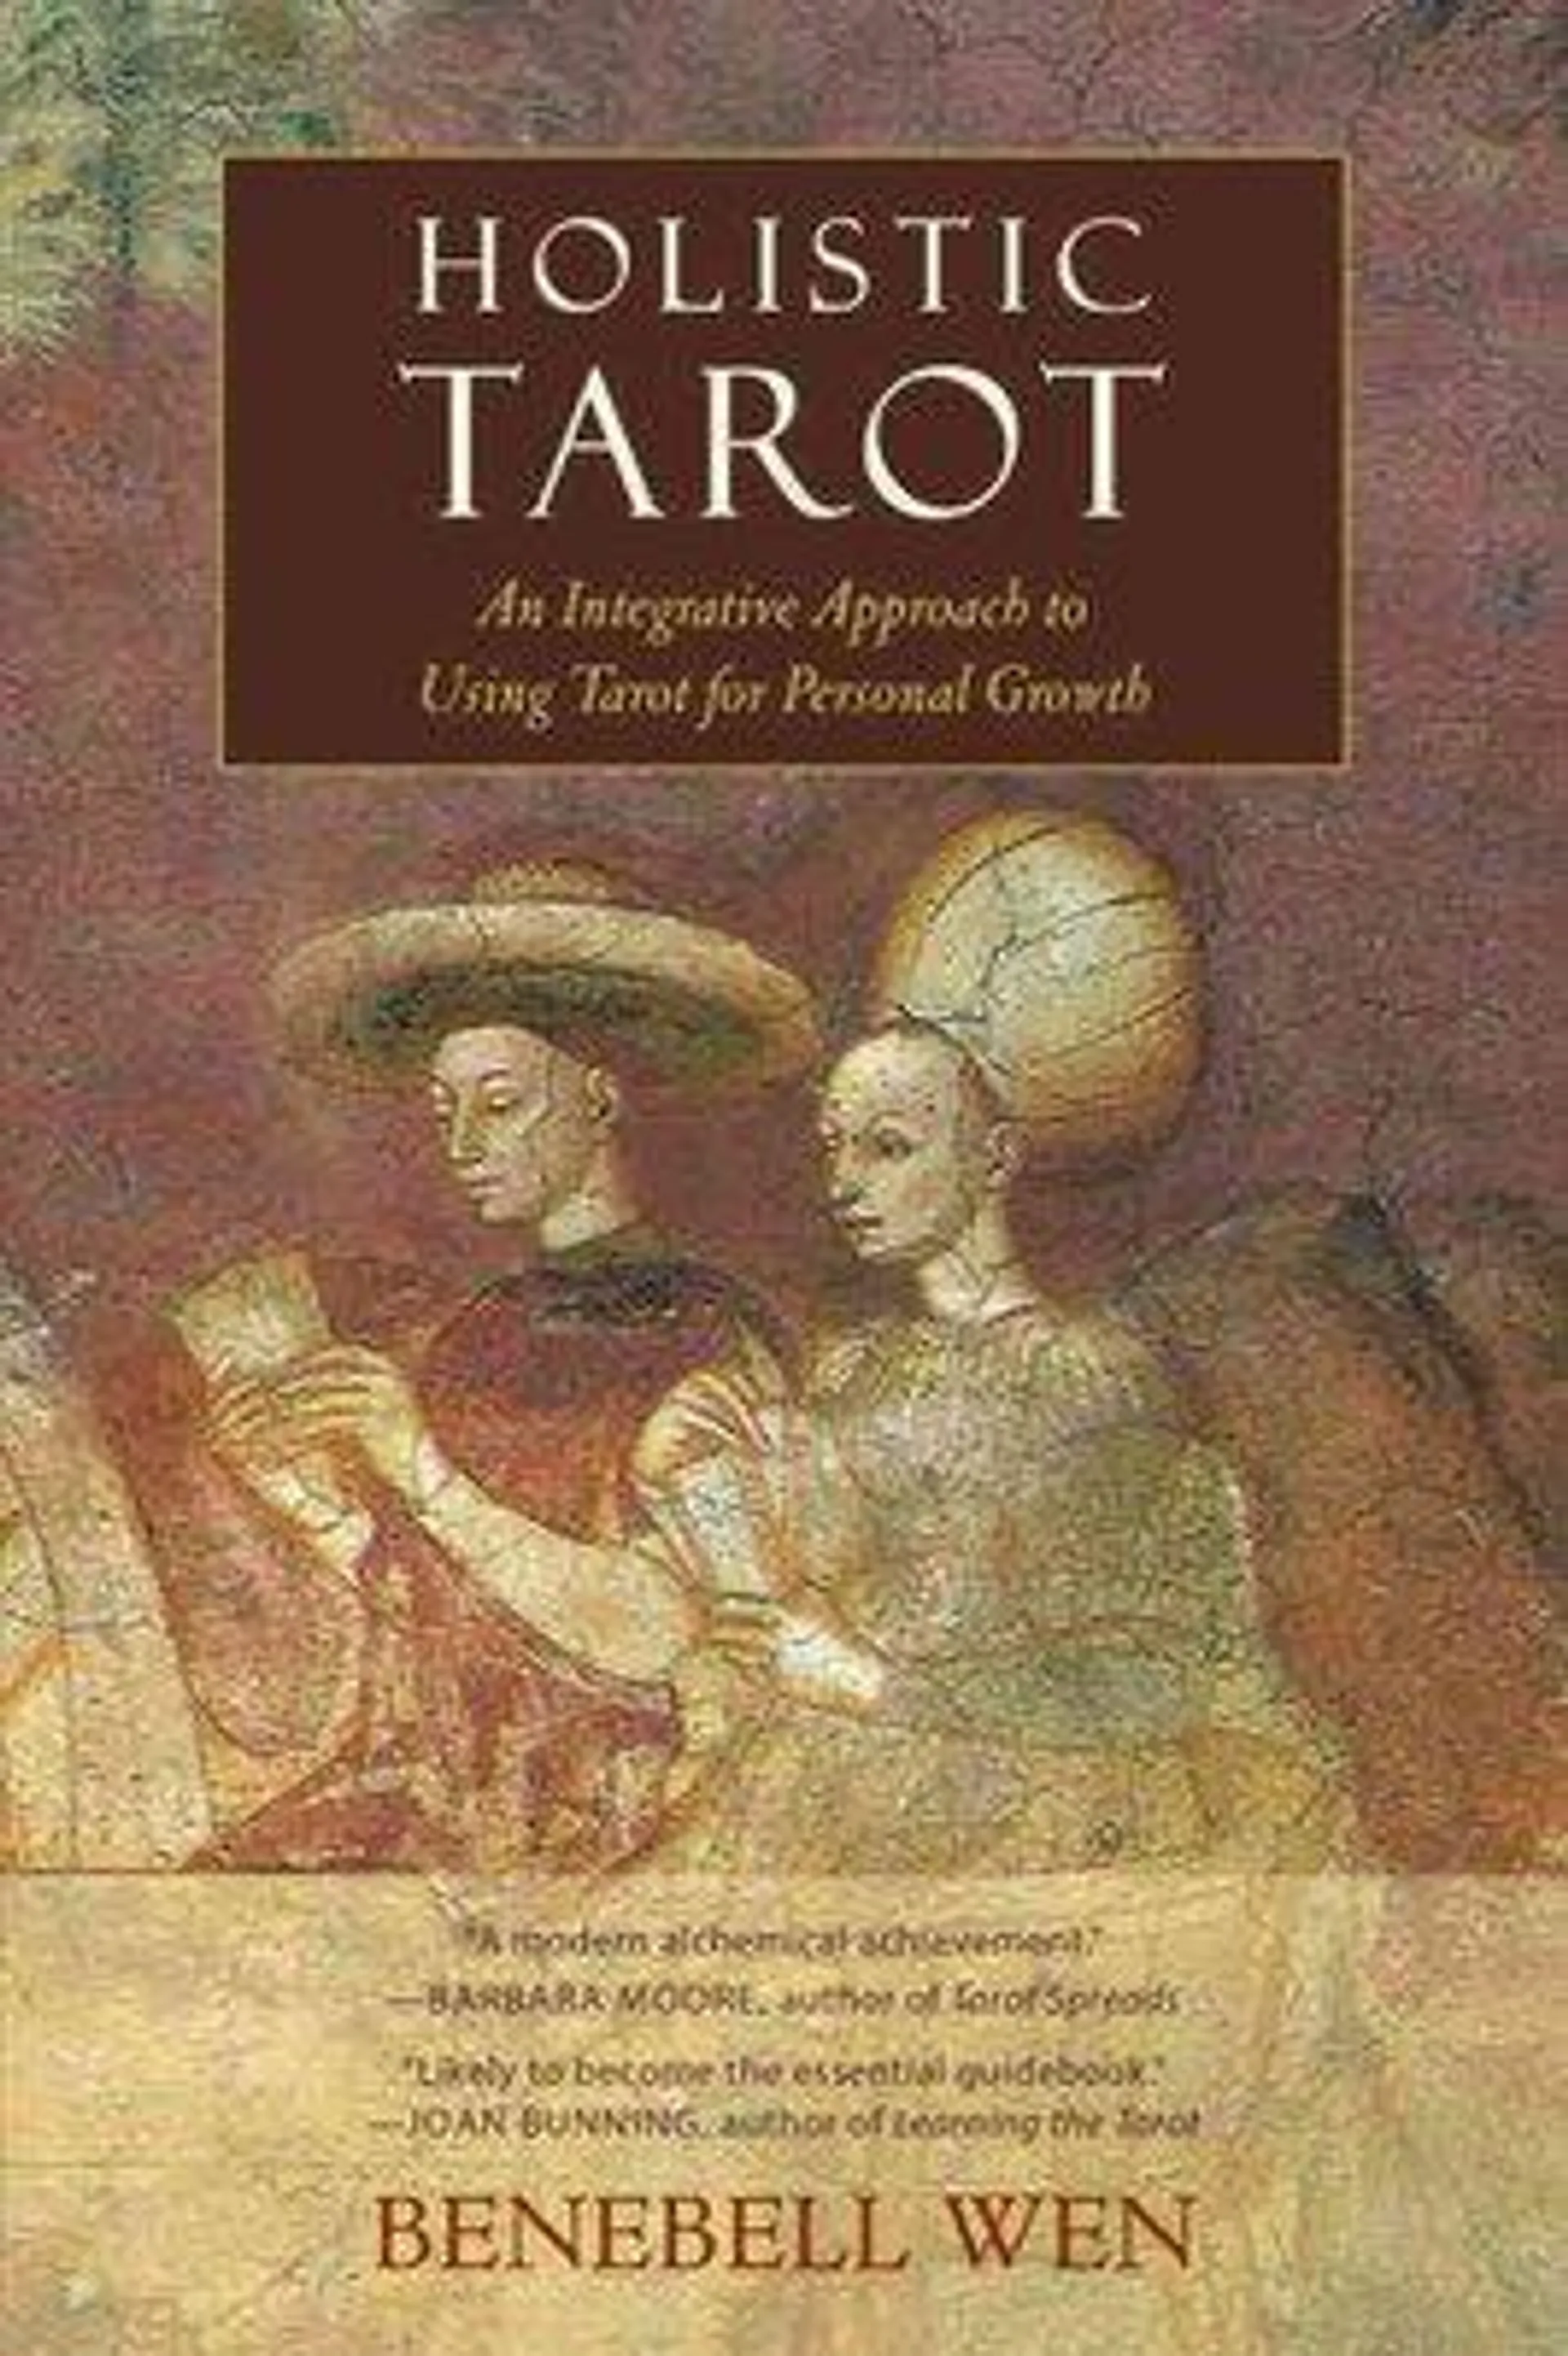 : An Integrative Approach to Using Tarot for Personal Growth